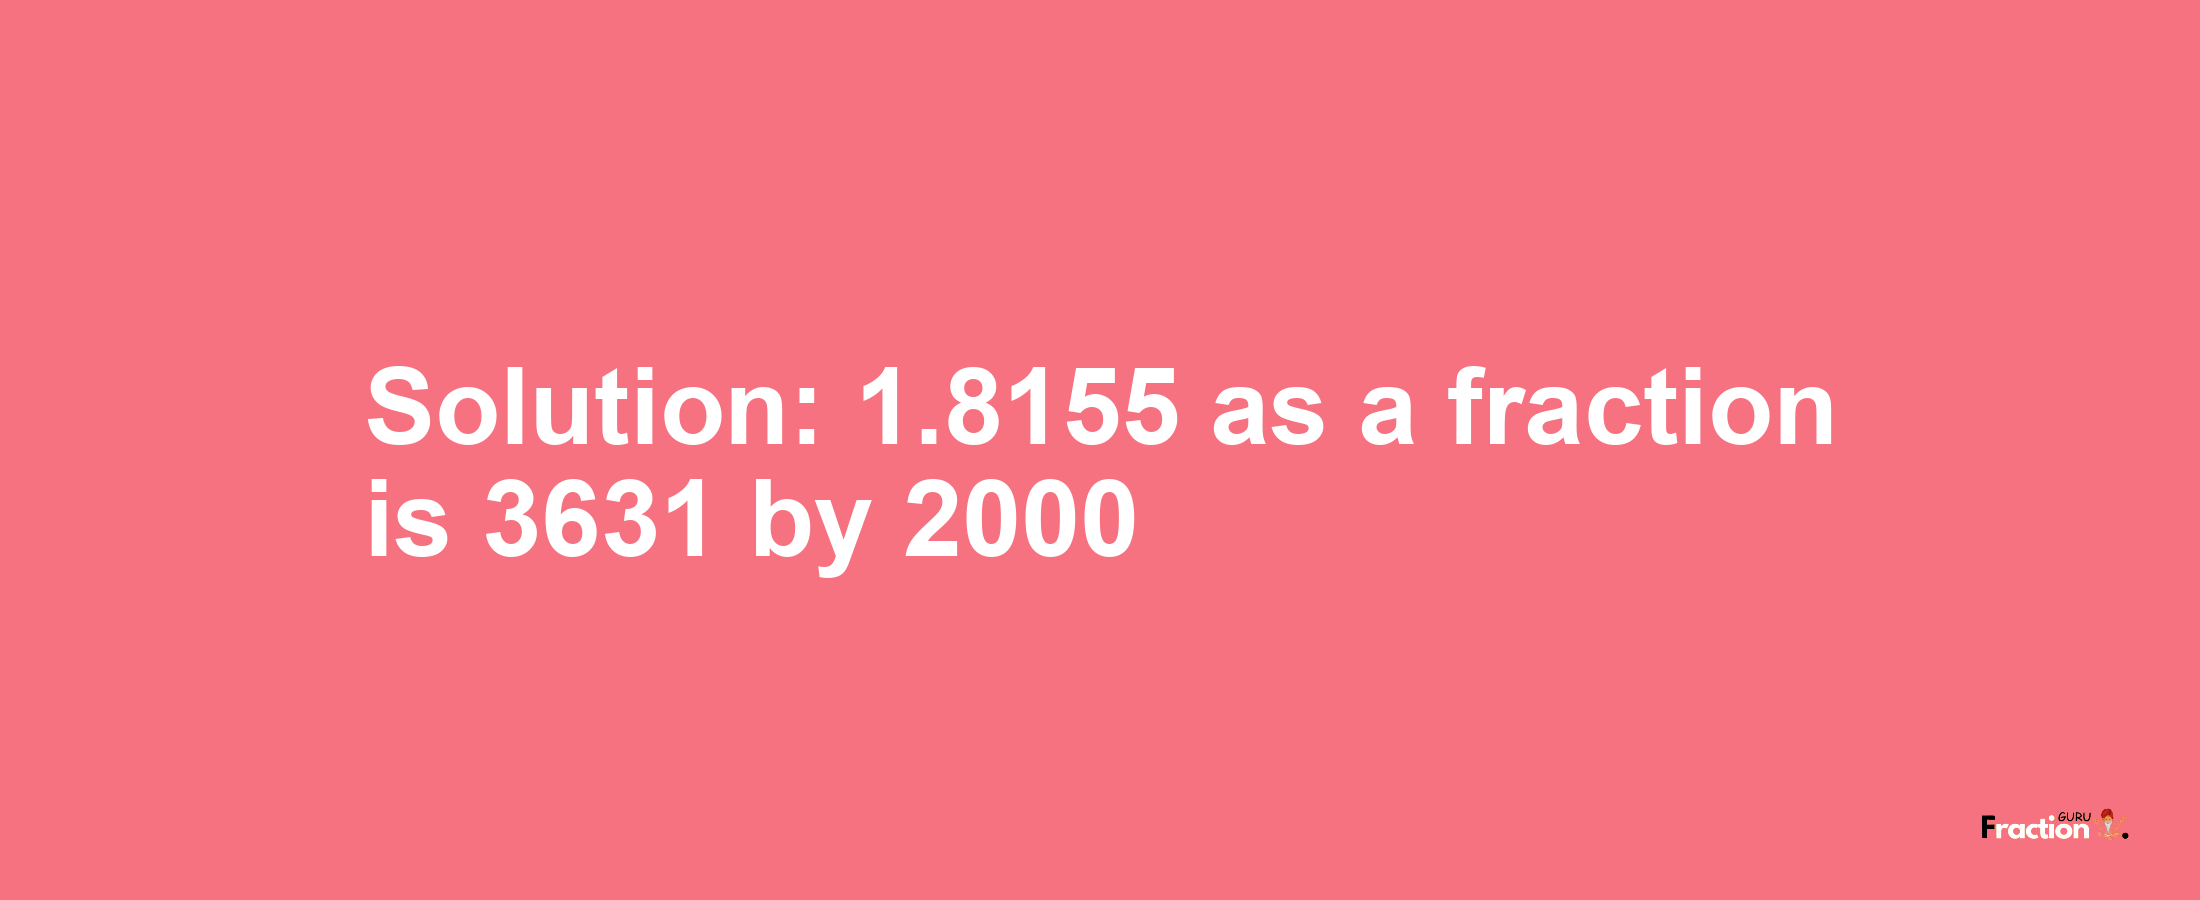 Solution:1.8155 as a fraction is 3631/2000